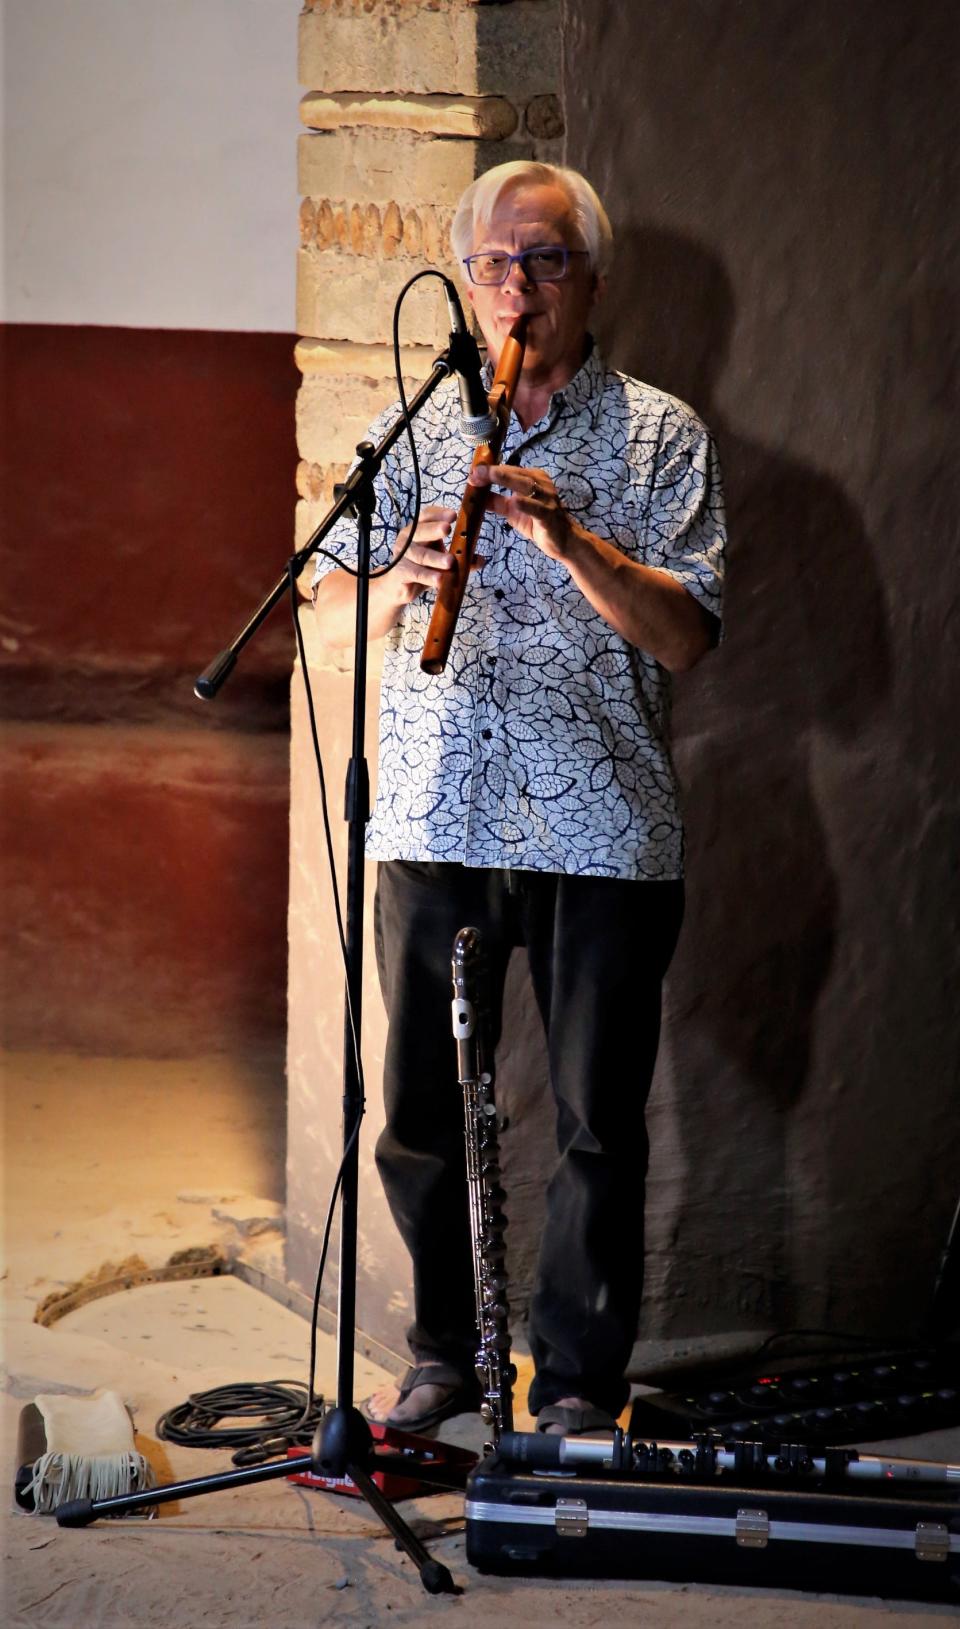 Ferdi Serim, the founder of New Mexico Family and Community Engagement Solutions, plays the flute during a performance on Friday Aug. 25 in the Great Kiva at Aztec Ruins National Monument.